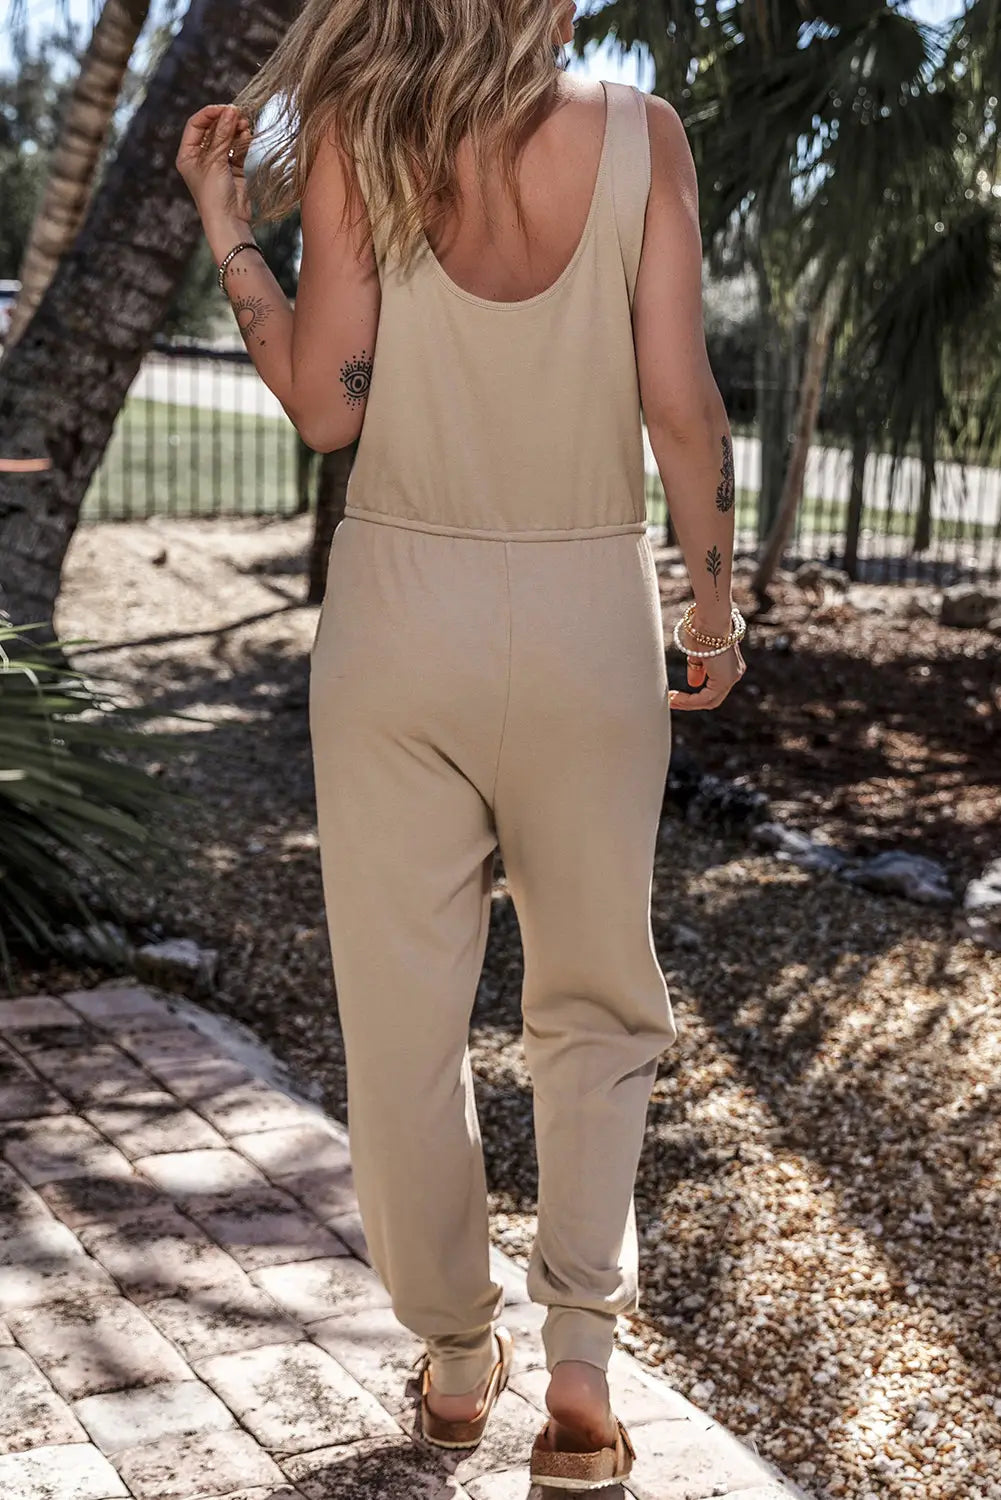 Sleeveless jogger jumpsuit - bottoms/jumpsuits & rompers